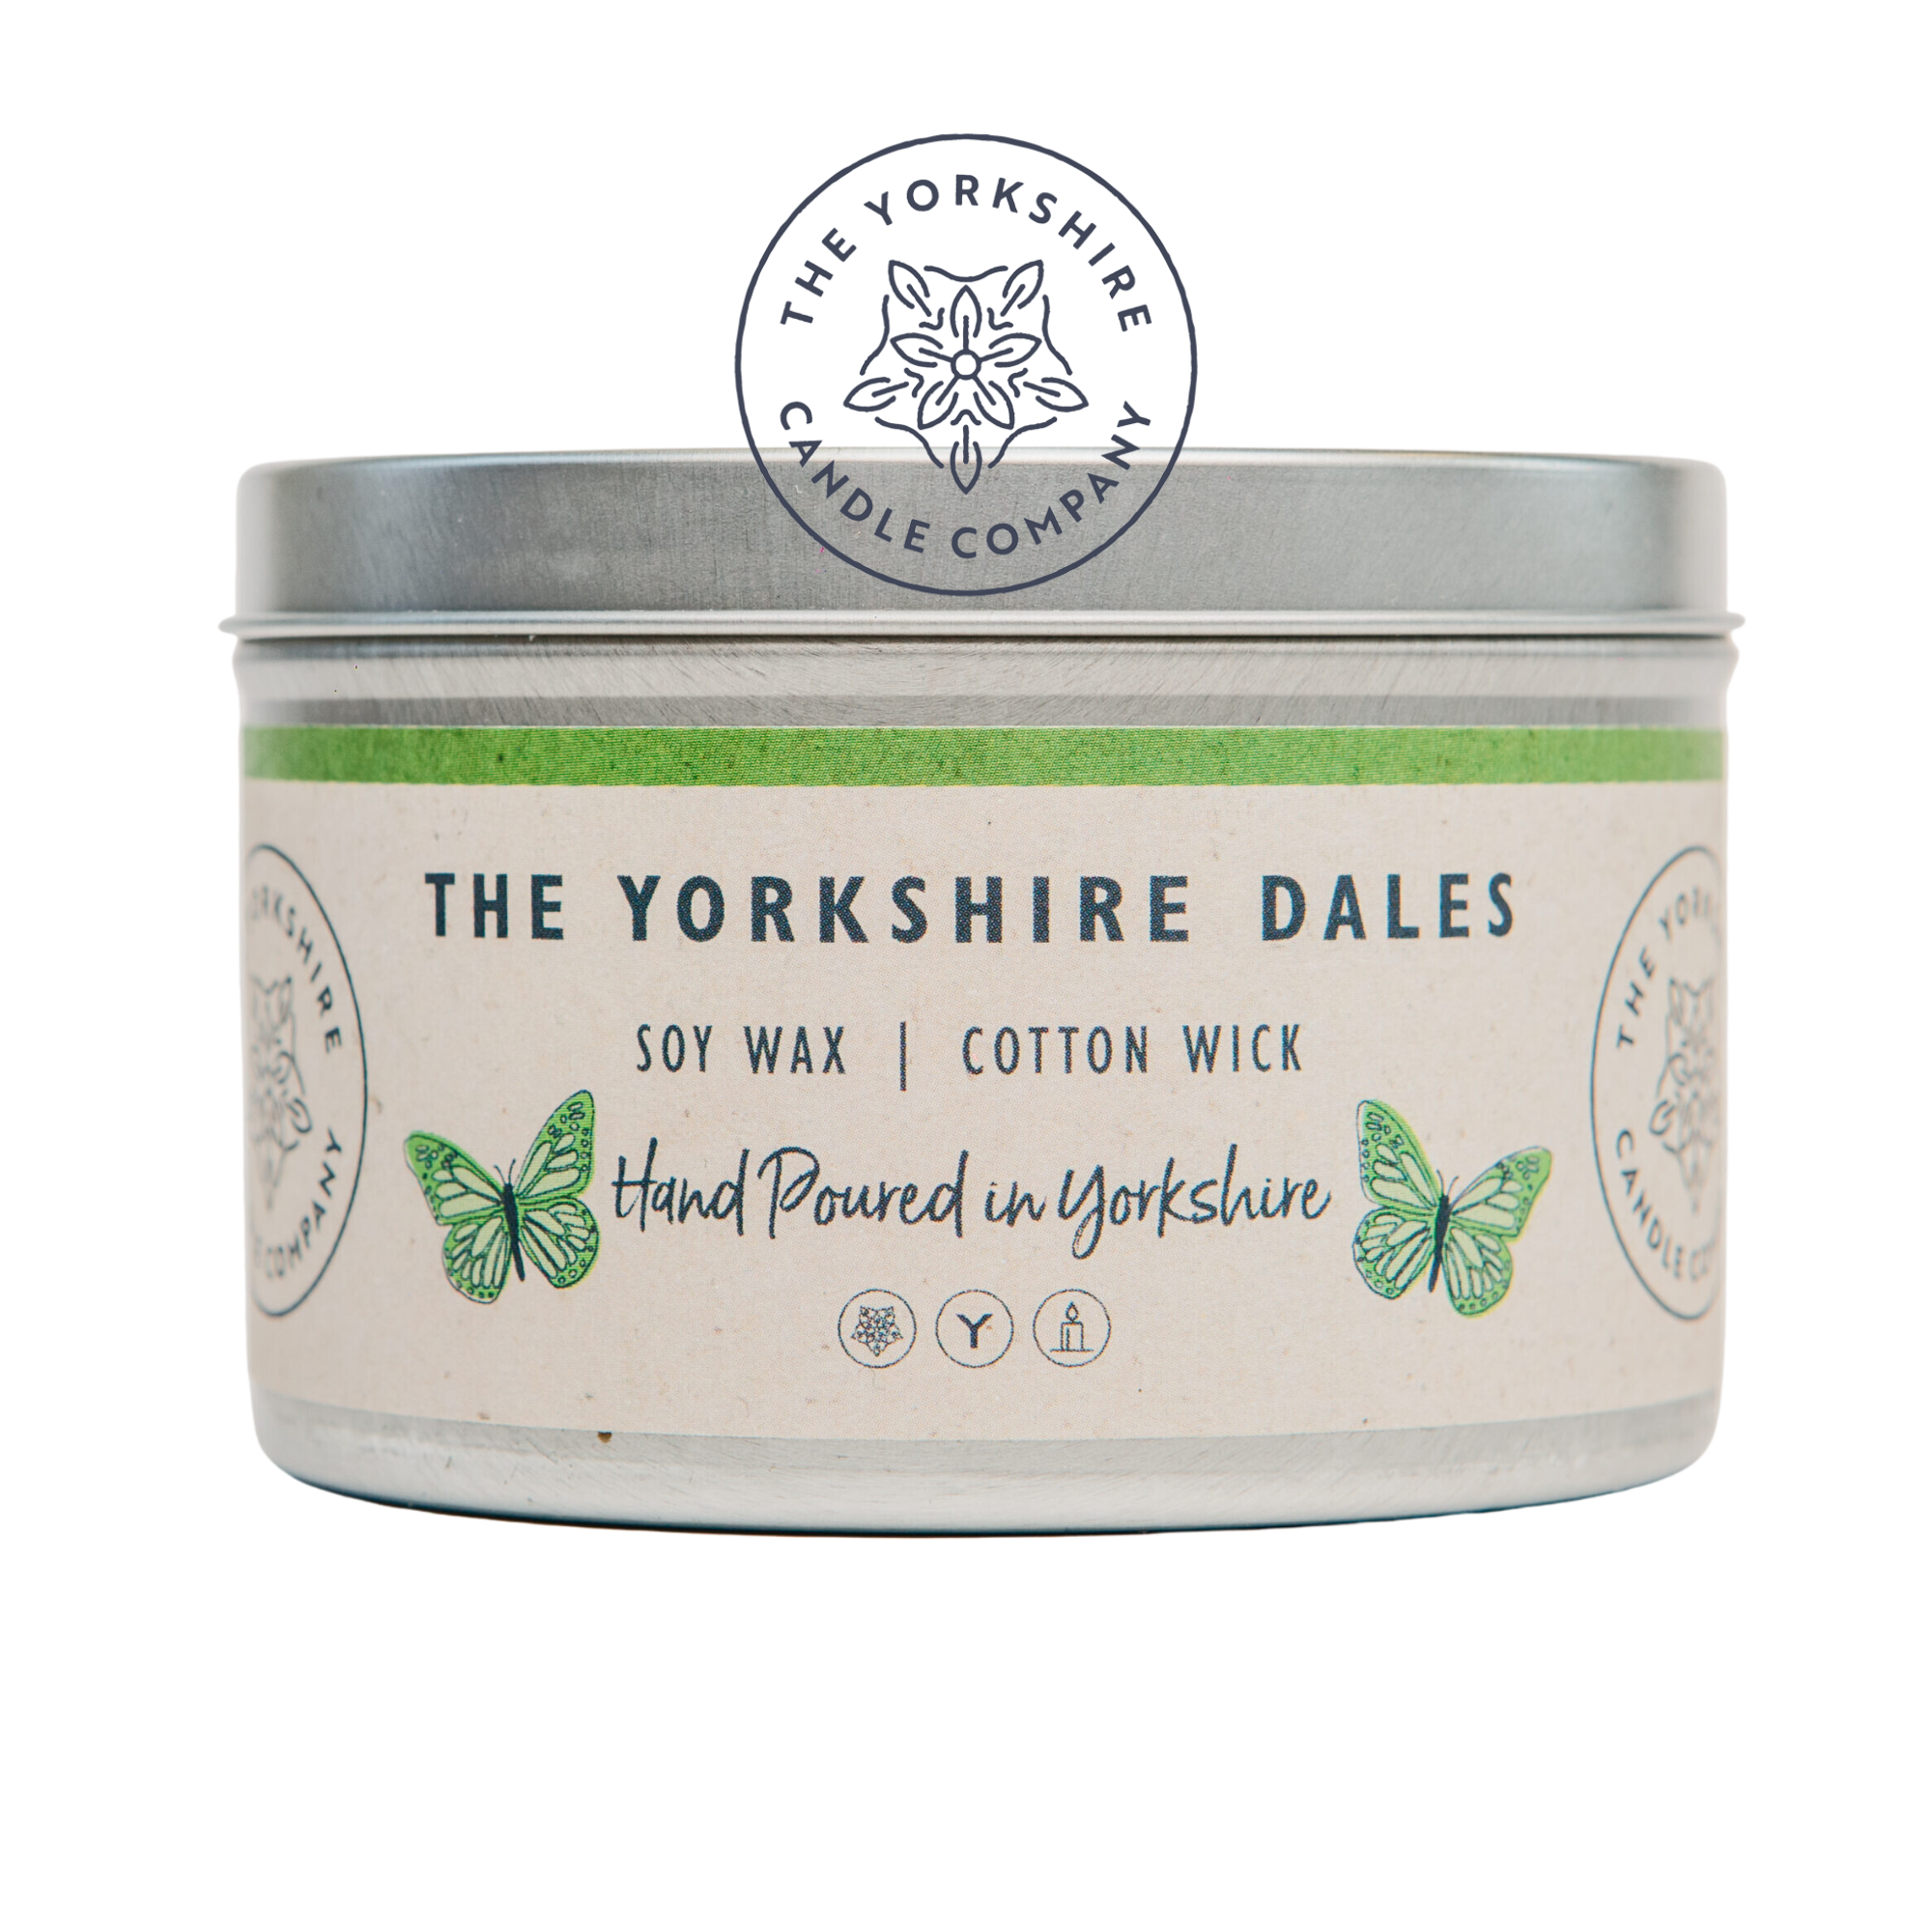 The Yorkshire Dales - Soy Wax Cotton Wick Hand Poured Candle by The Yorkshire Candle Company